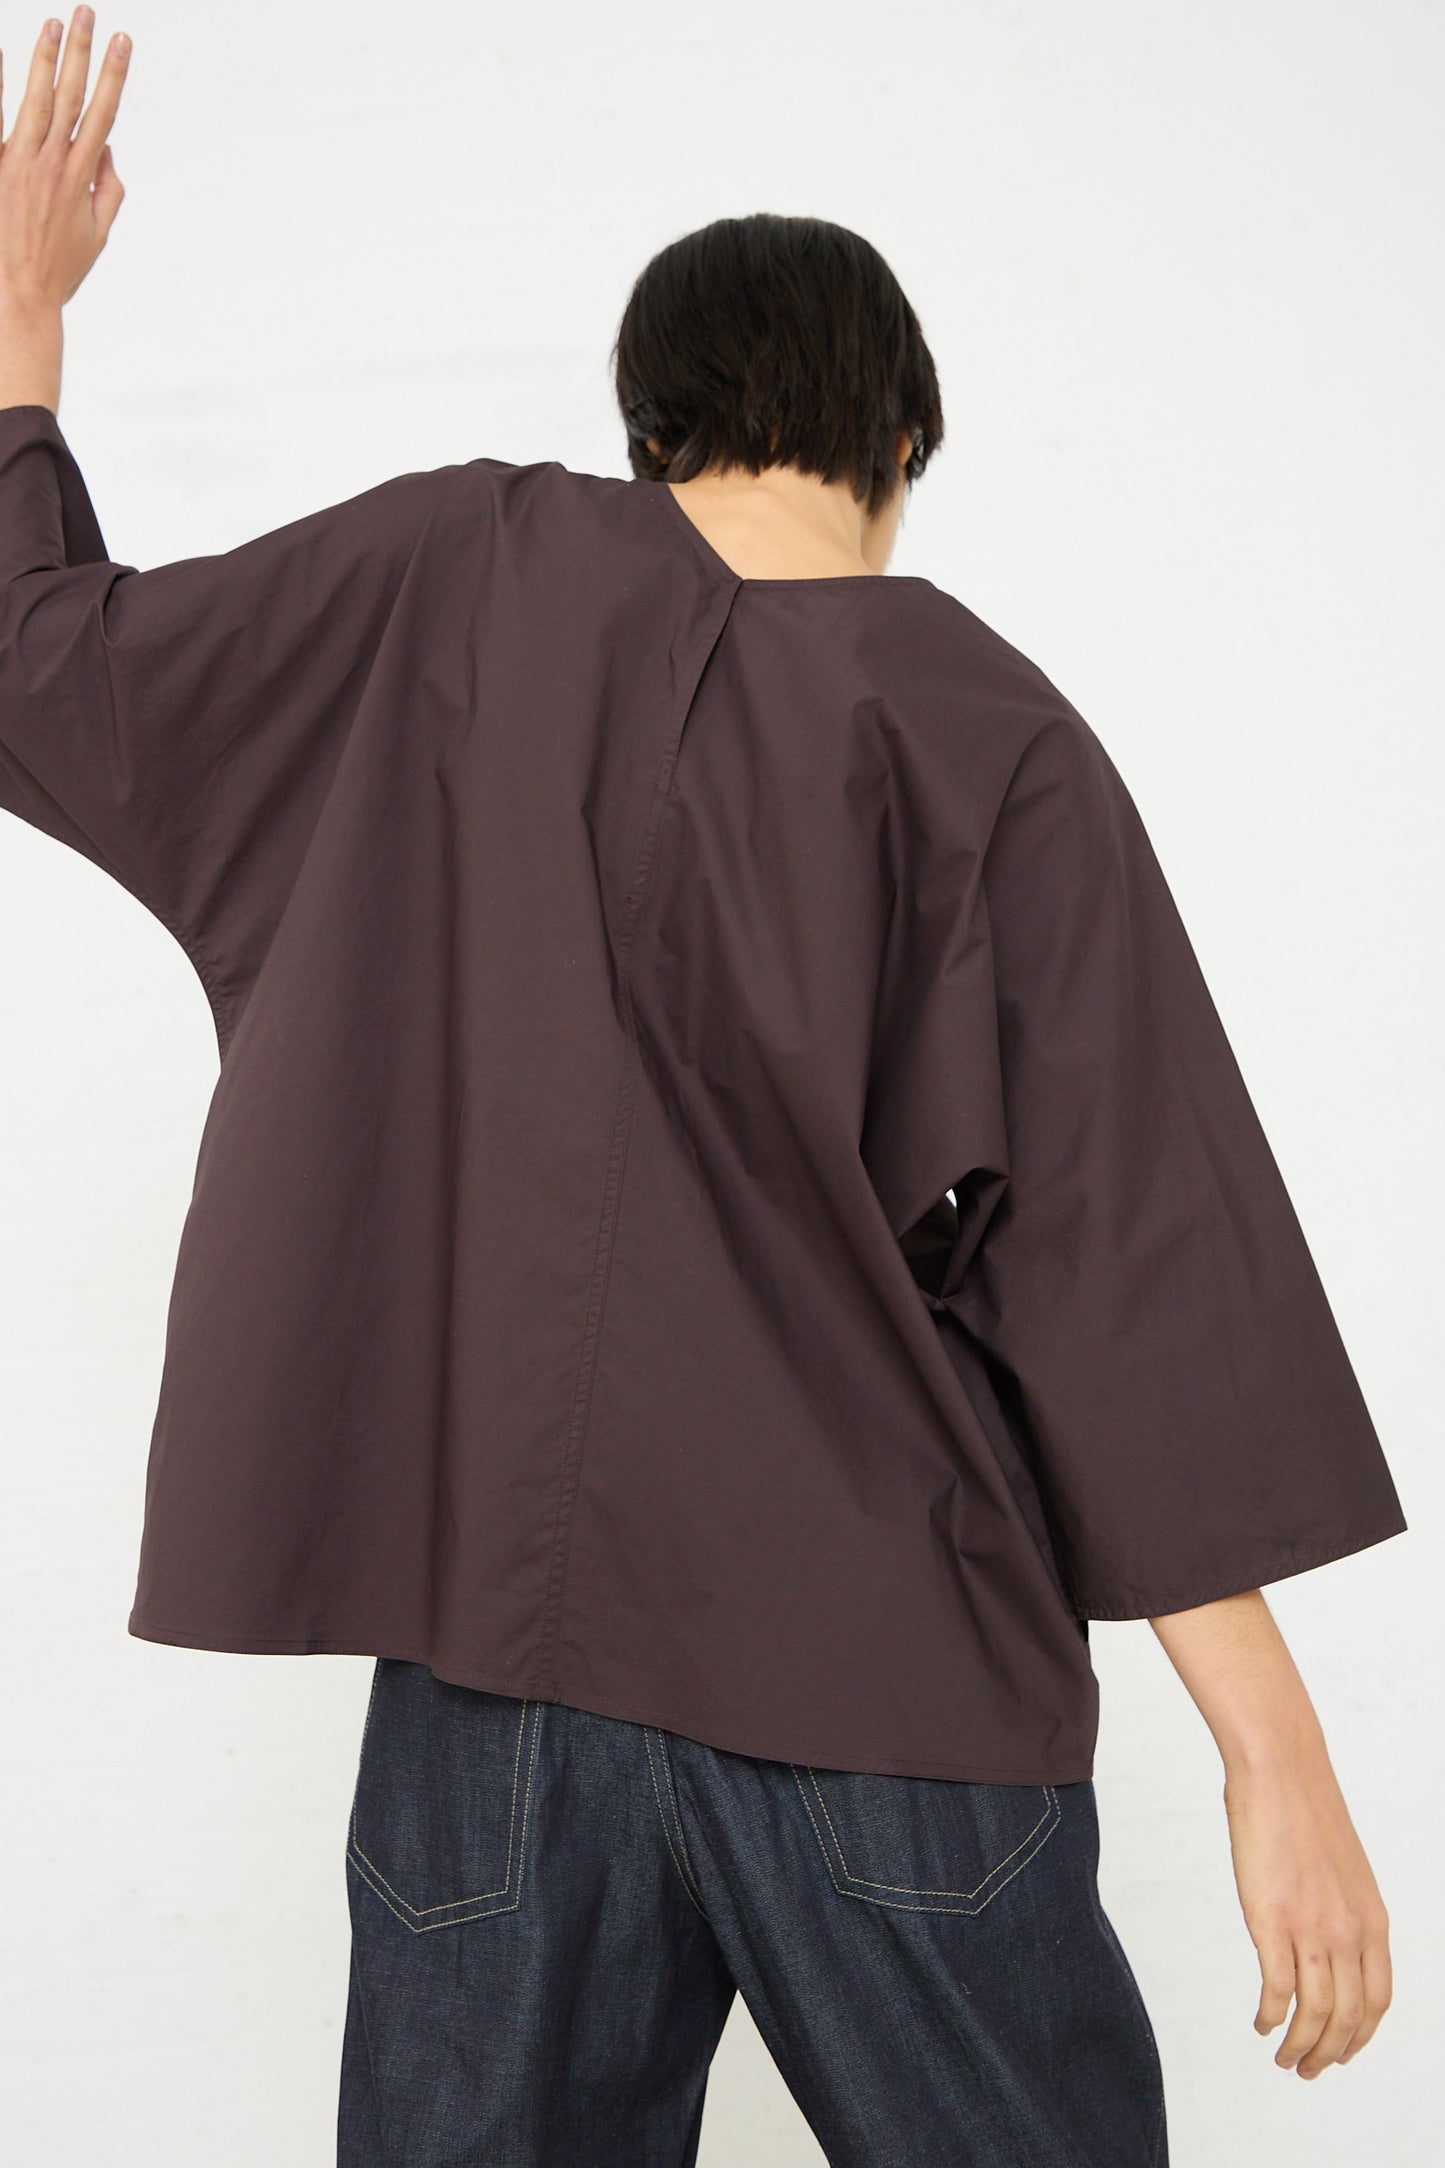 A woman in a brown shirt with an oversized fit, the Sofie D'Hoore Cotton Poplin Bendol Top with Scarf in Ebony, is standing with her arms outstretched. Back view.